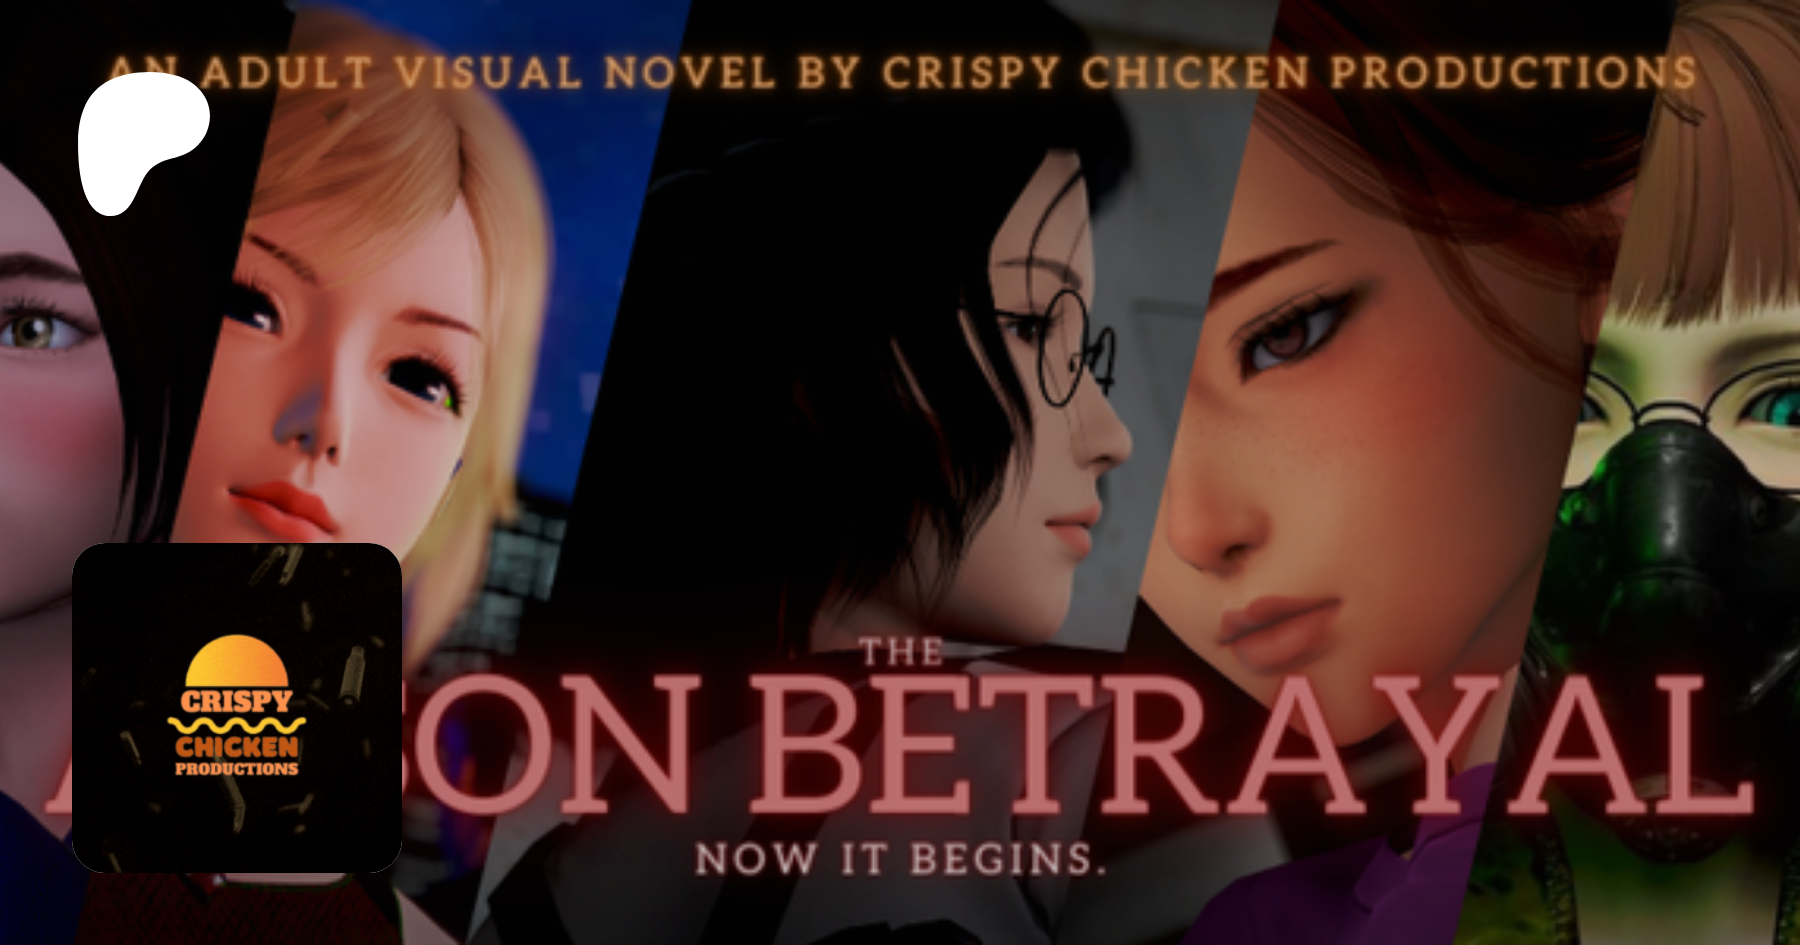 Crispy Chicken Productions | creating the adult visual novel: The Arson  Betrayal. | Patreon